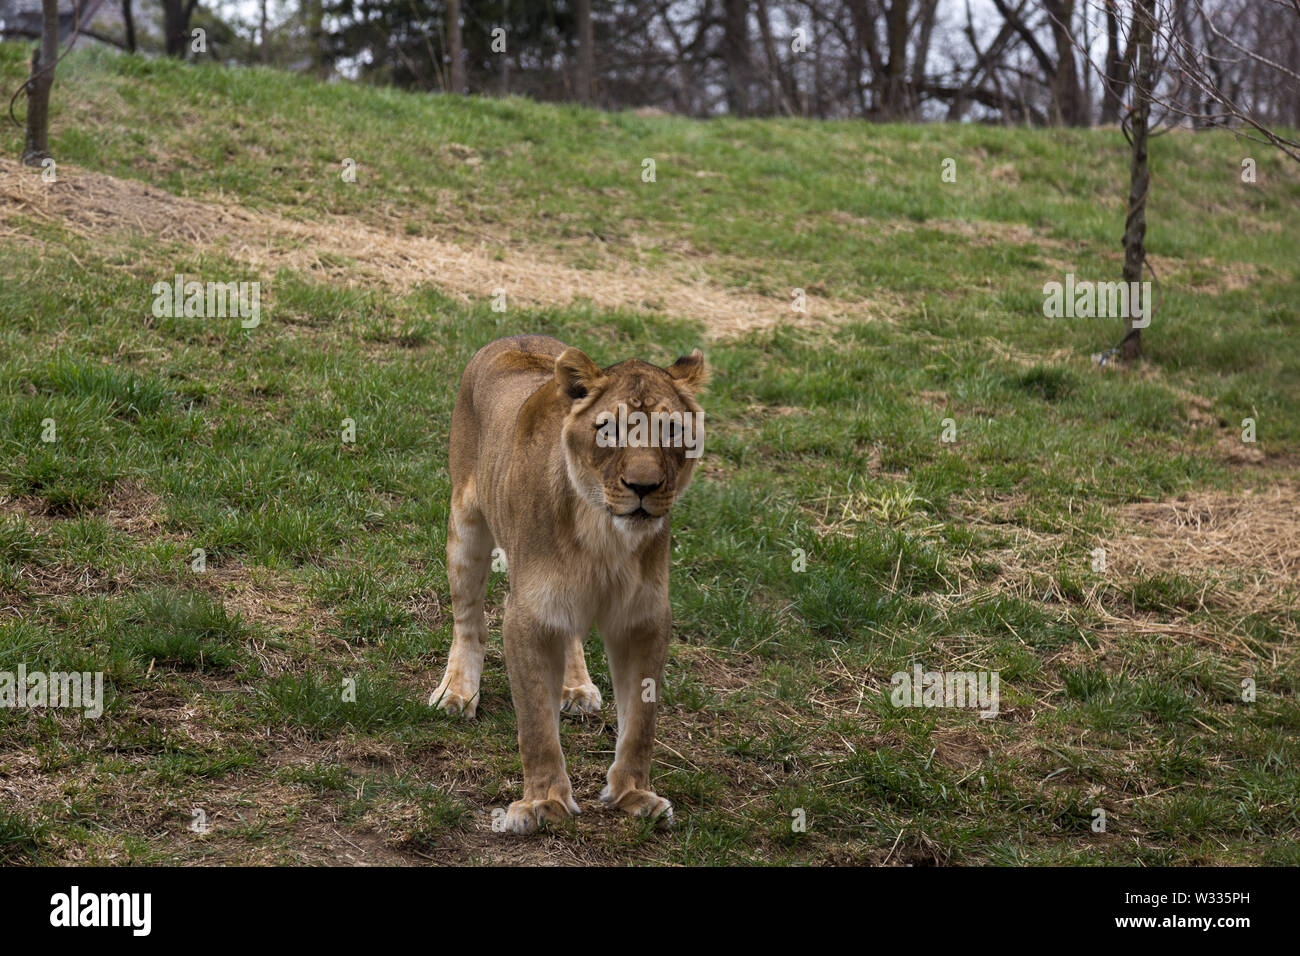 Ina, the female African Lion at the Fort Wayne Children's Zoo, in her enclosure in Fort Wayne, Indiana, USA. Stock Photo